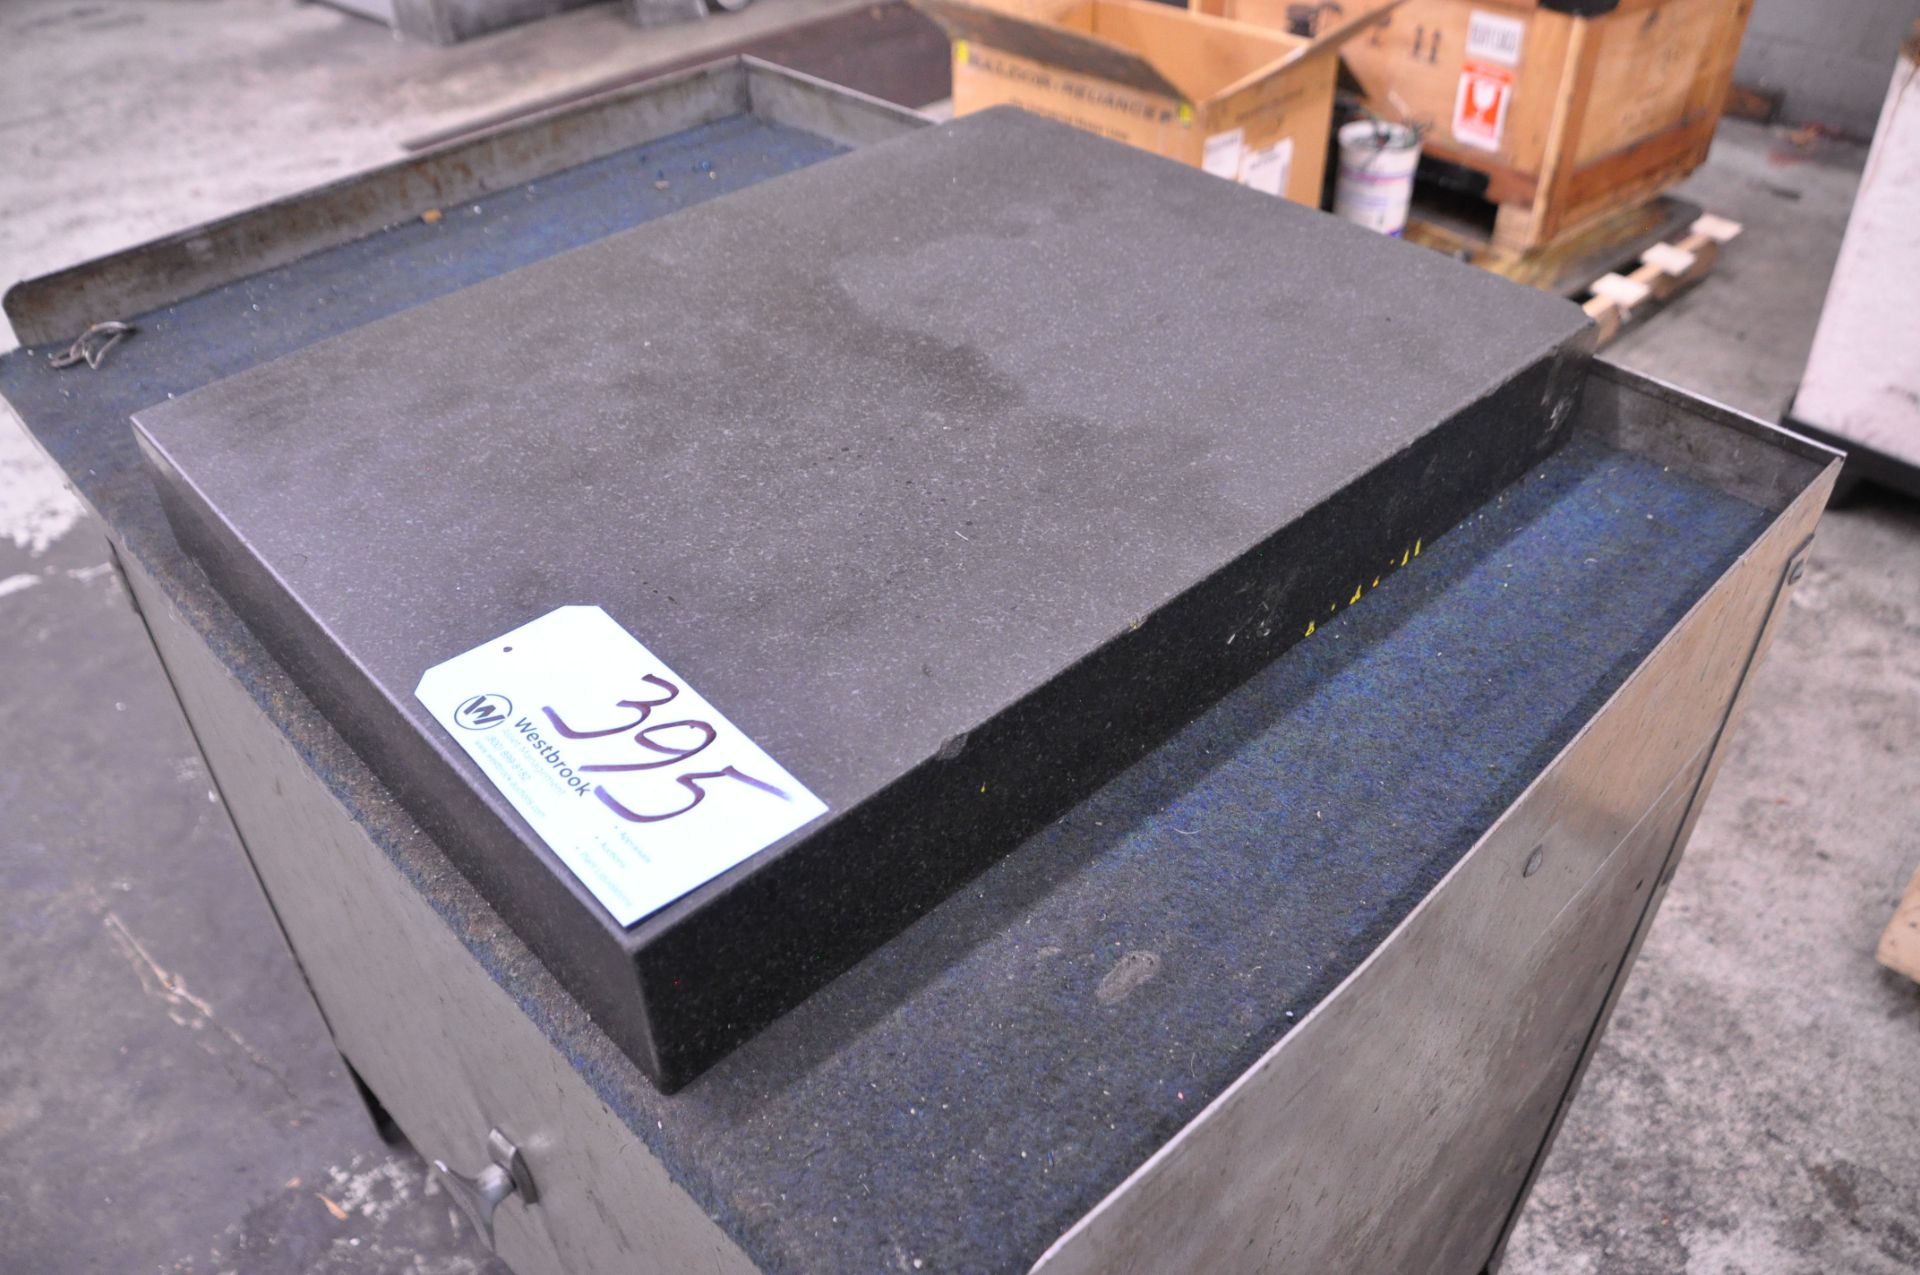 18" x 24" x 3" Black Granite Surface Plate with Cabinet Base - Image 2 of 2